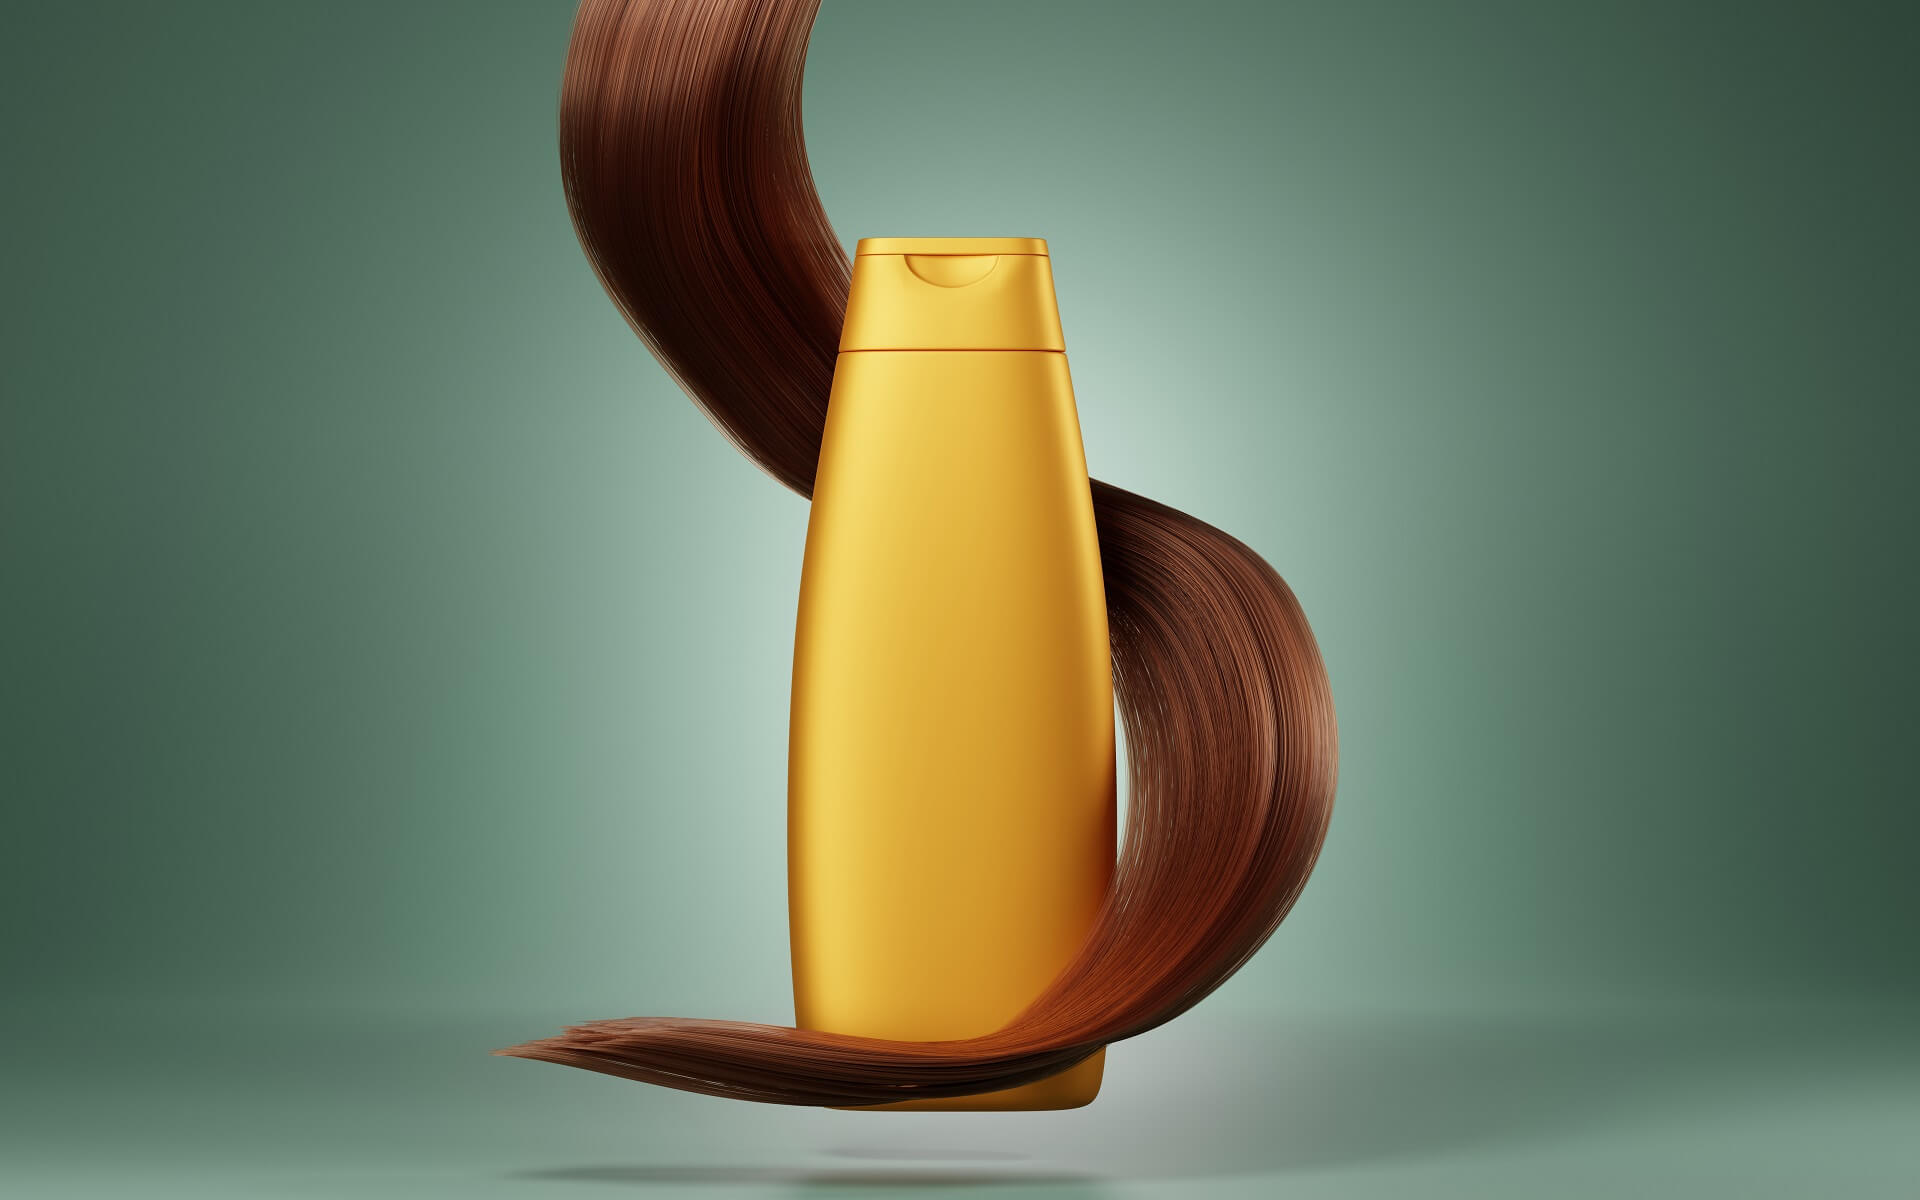 1----shampoo-bottle-with-wavy-locks-hair-green-background-mock-up-banner-cosmetics-beauty-tube-keratin-gel-collagen-serum-yellow-empty-package-ad-hair-repair-product-concept-3d-illustration (1)